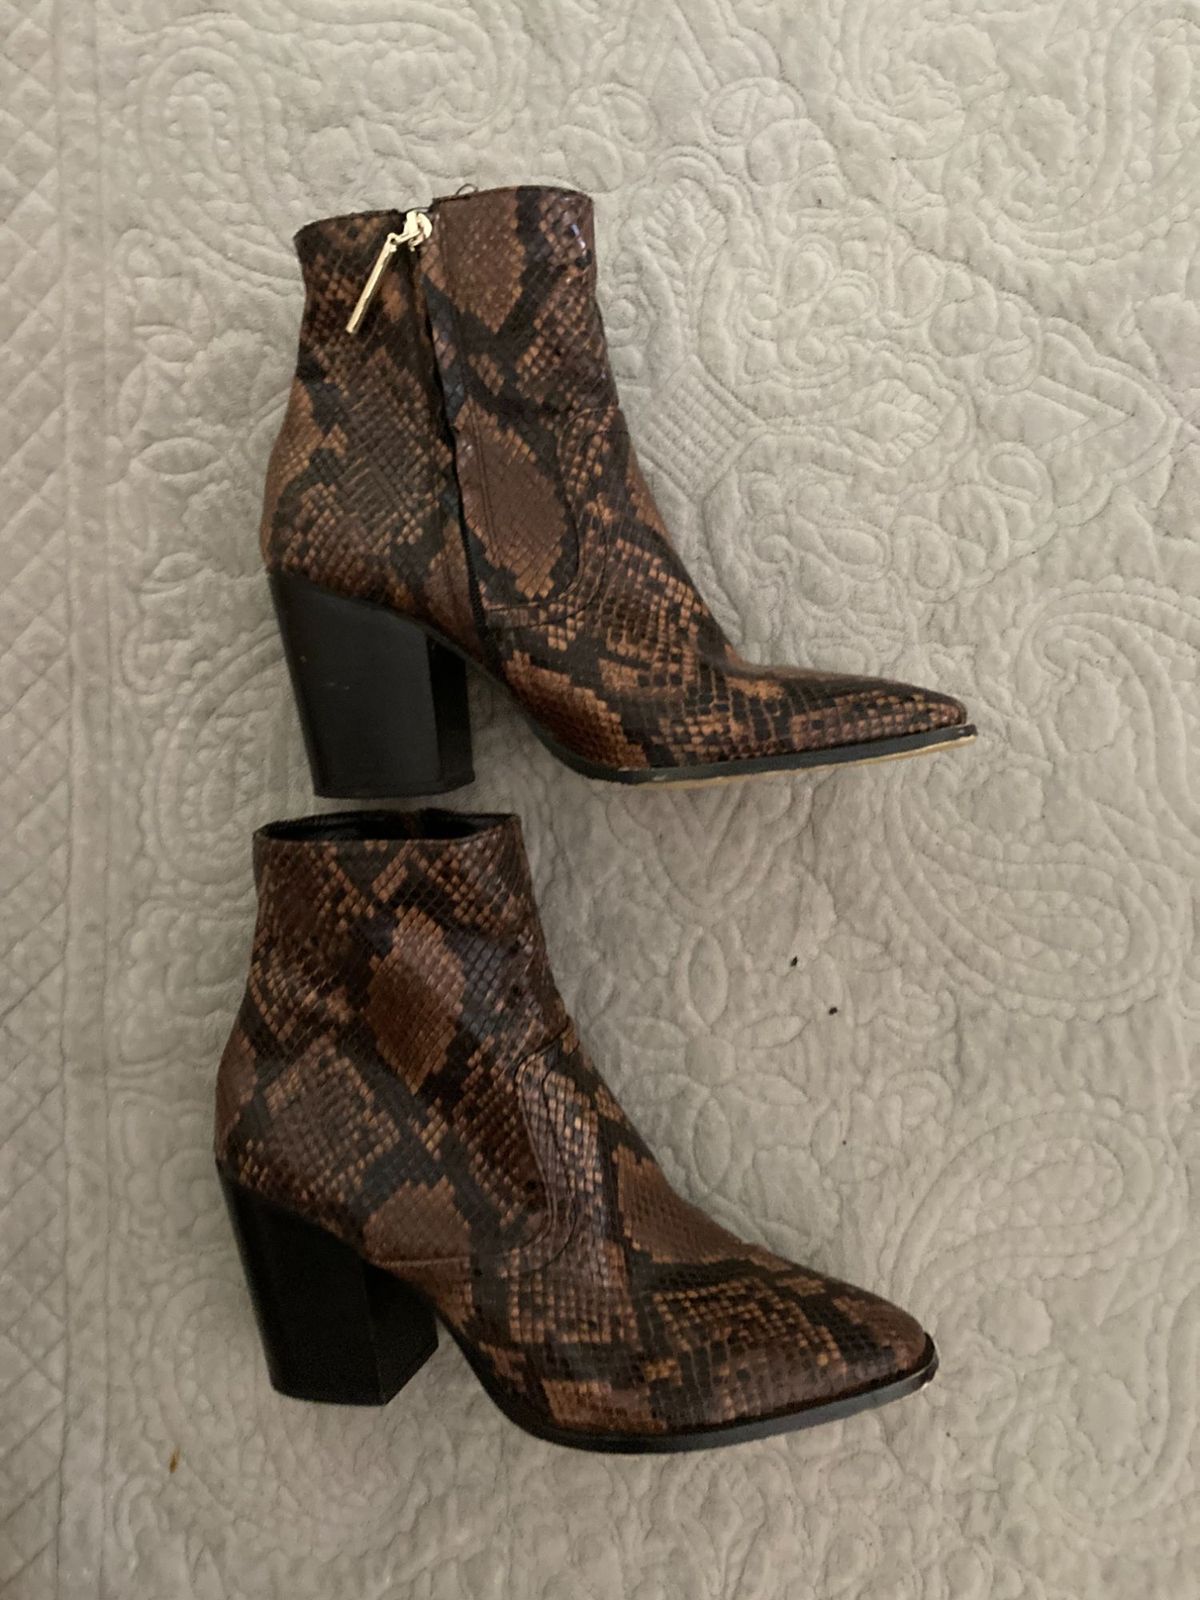 Women | Zara ankle boots. Size 8 UK. Used. Can